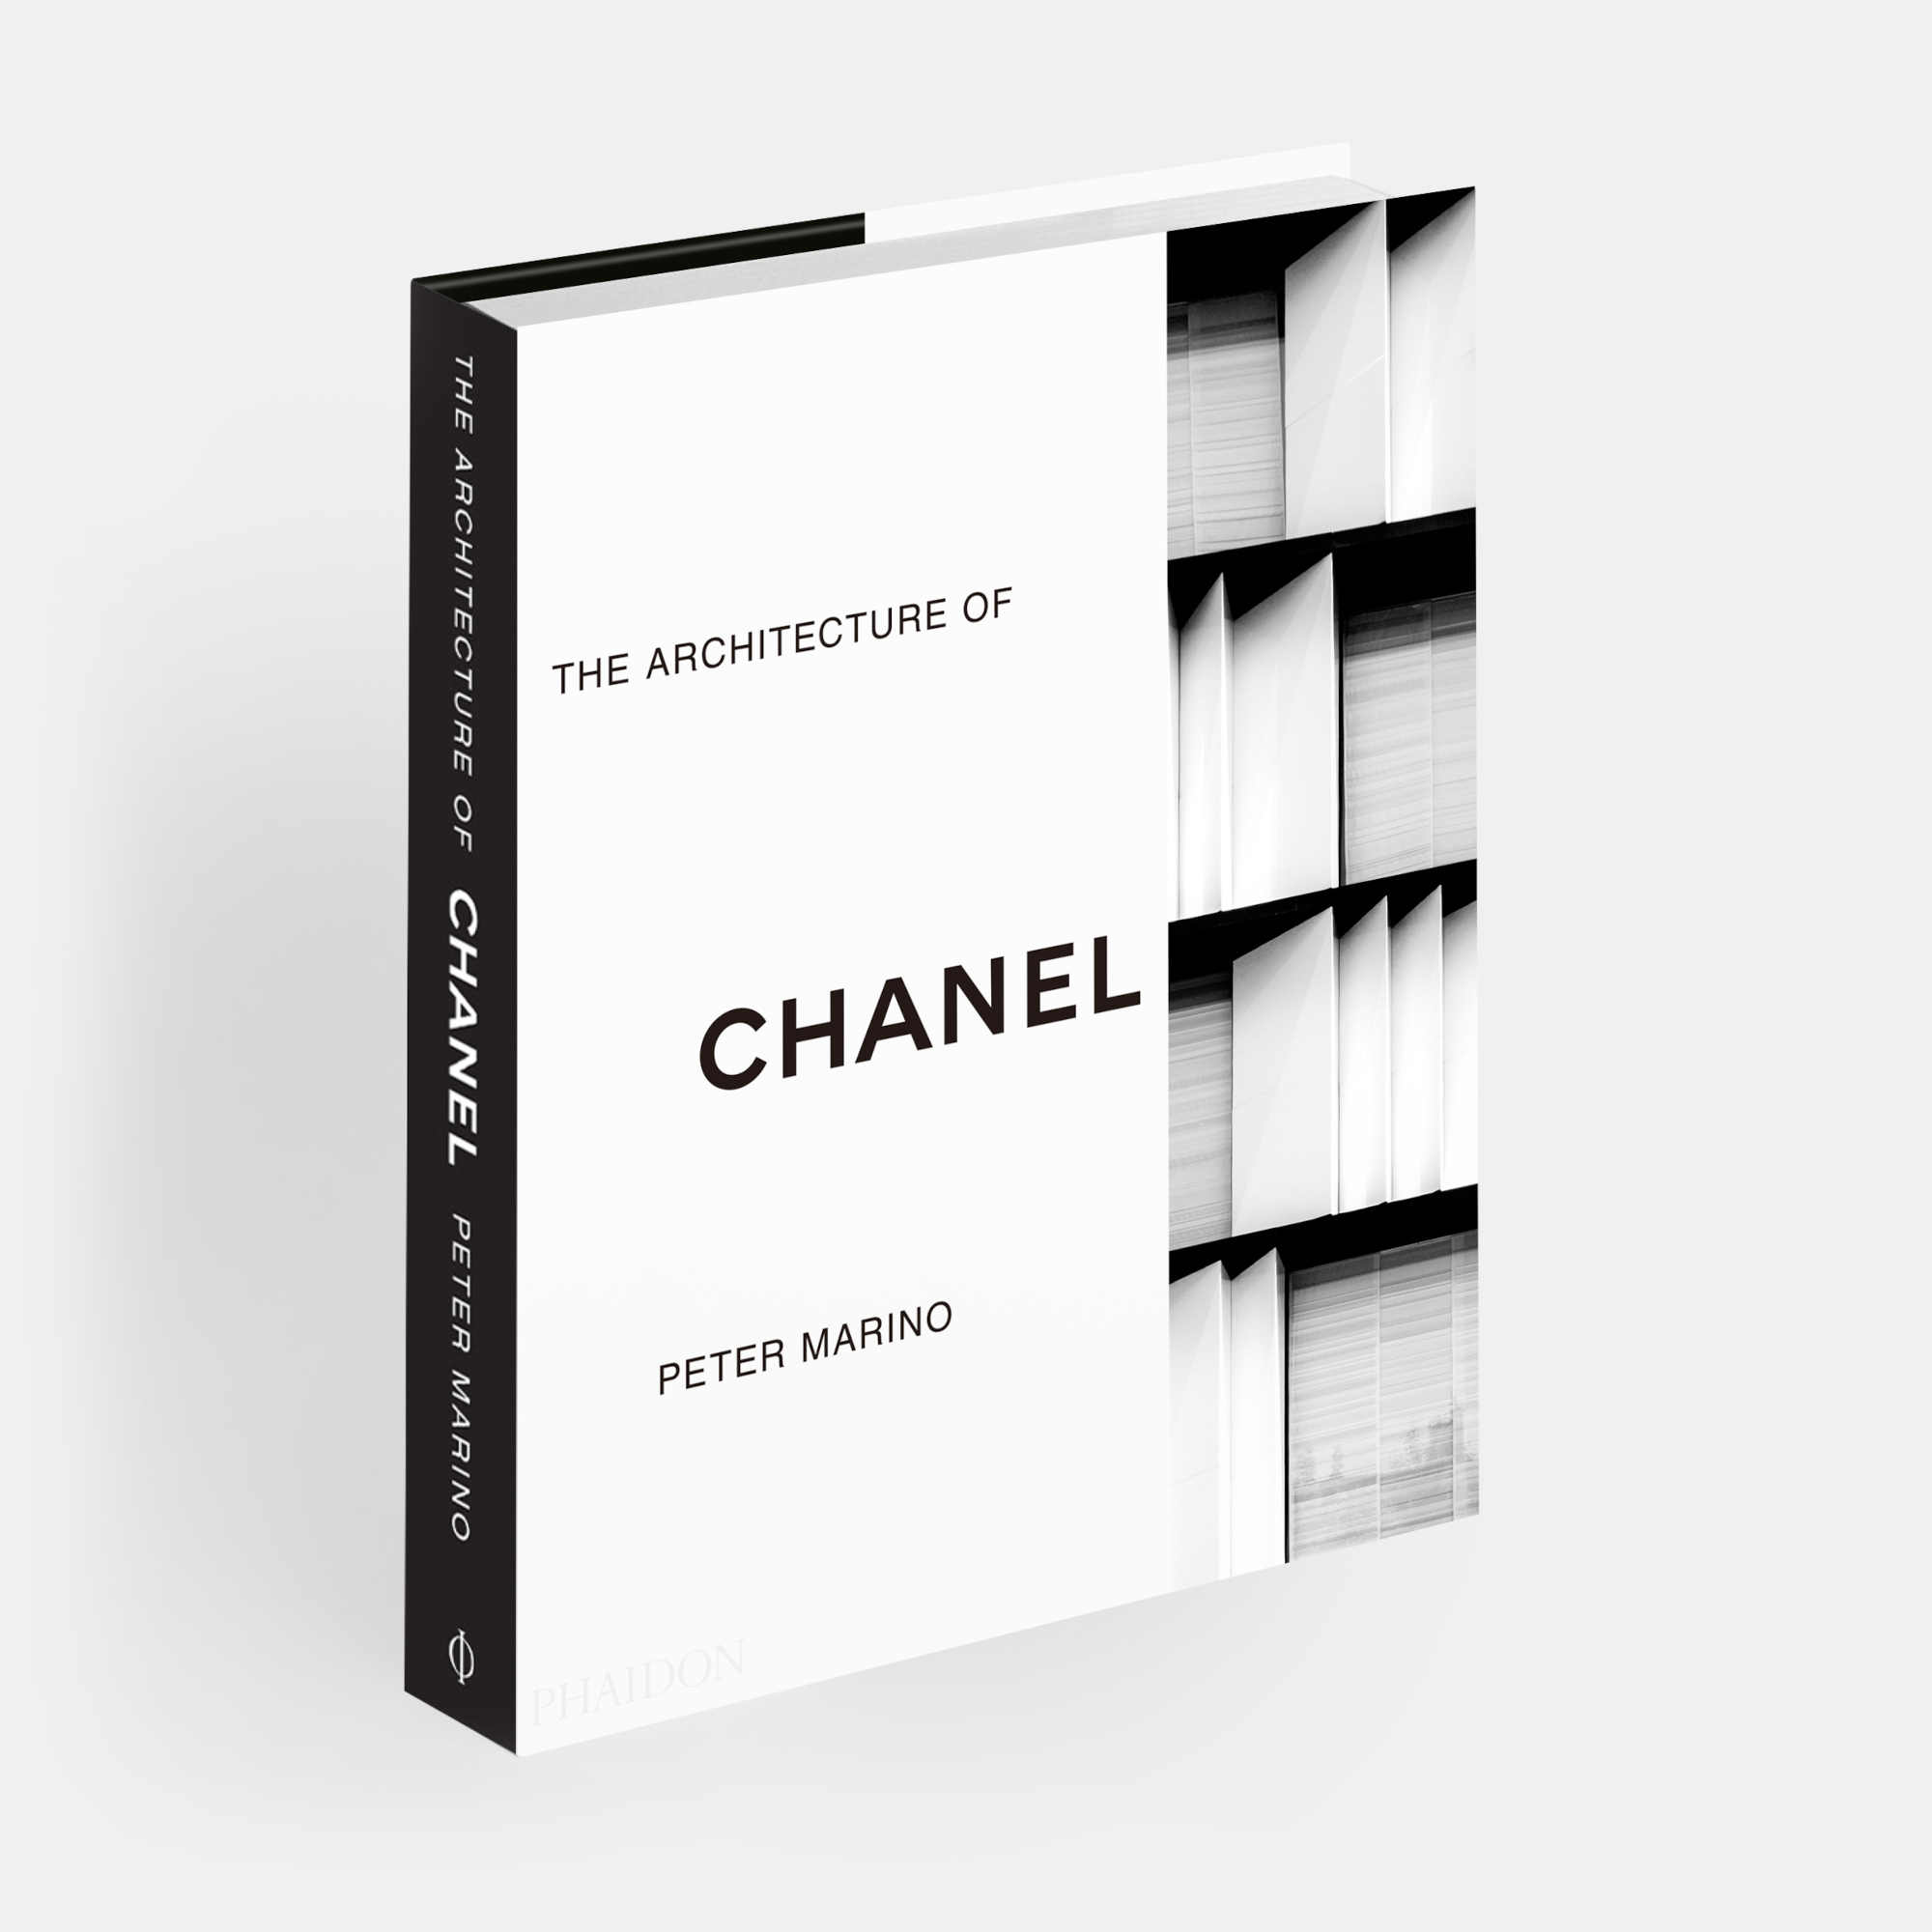 All you need to know about Peter Marino: The Architecture of Chanel, architecture, Agenda